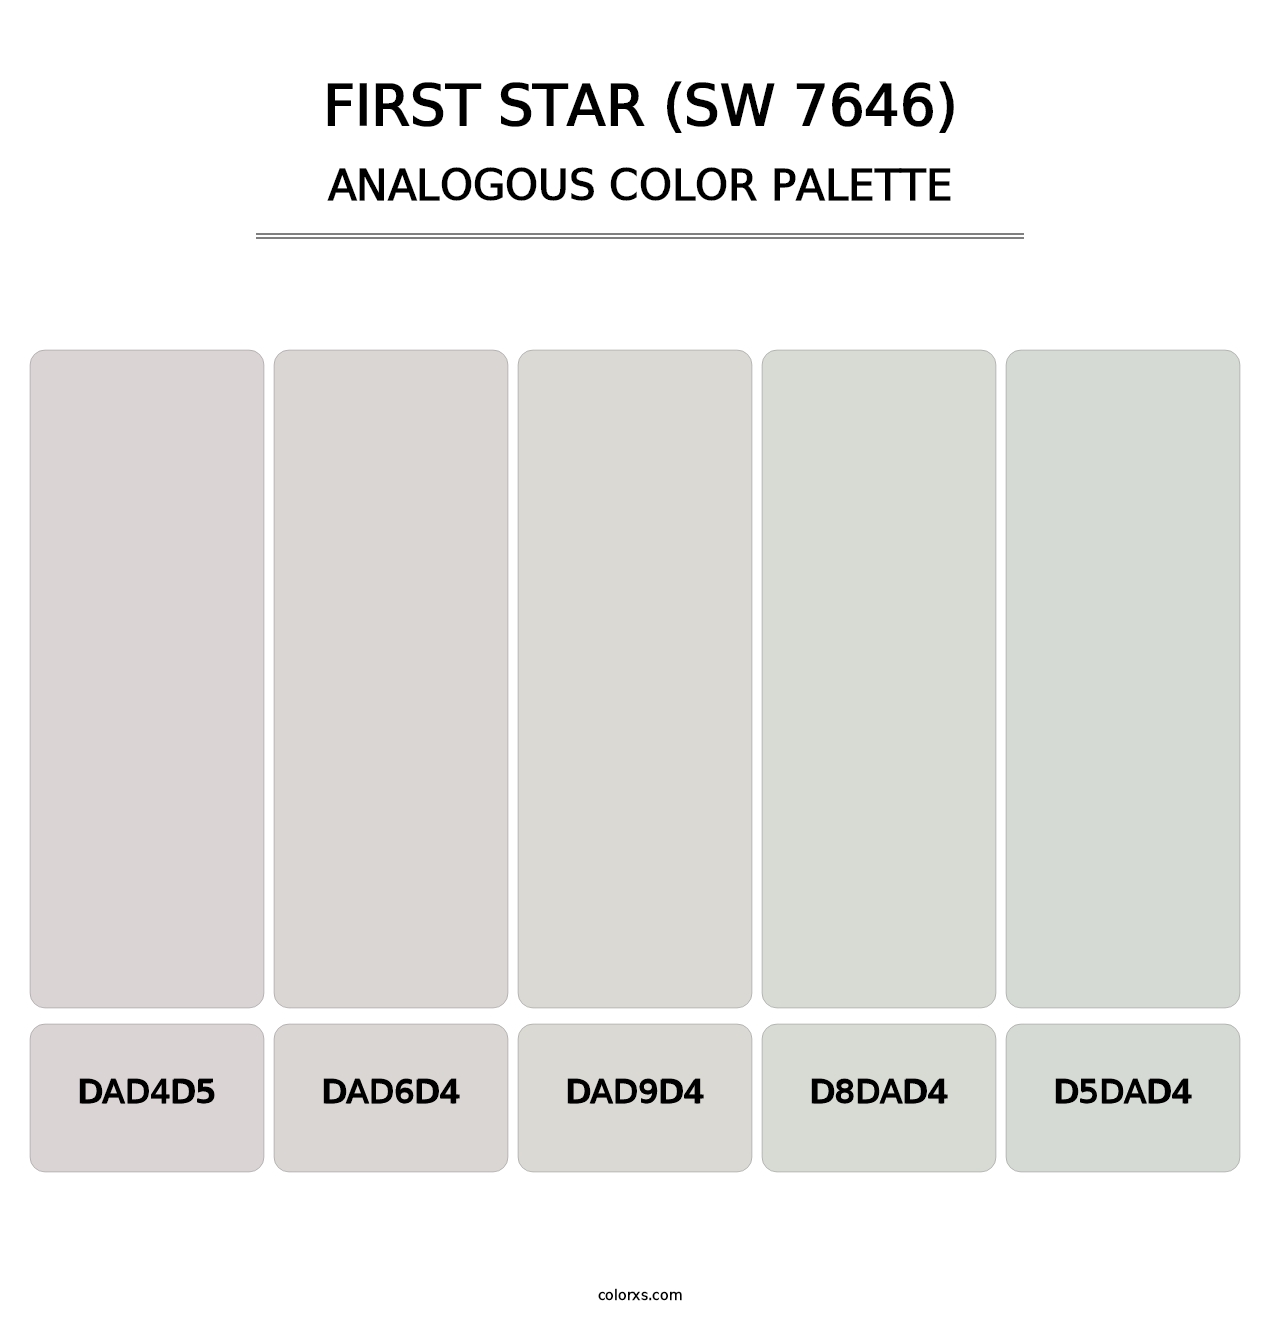 First Star (SW 7646) - Analogous Color Palette